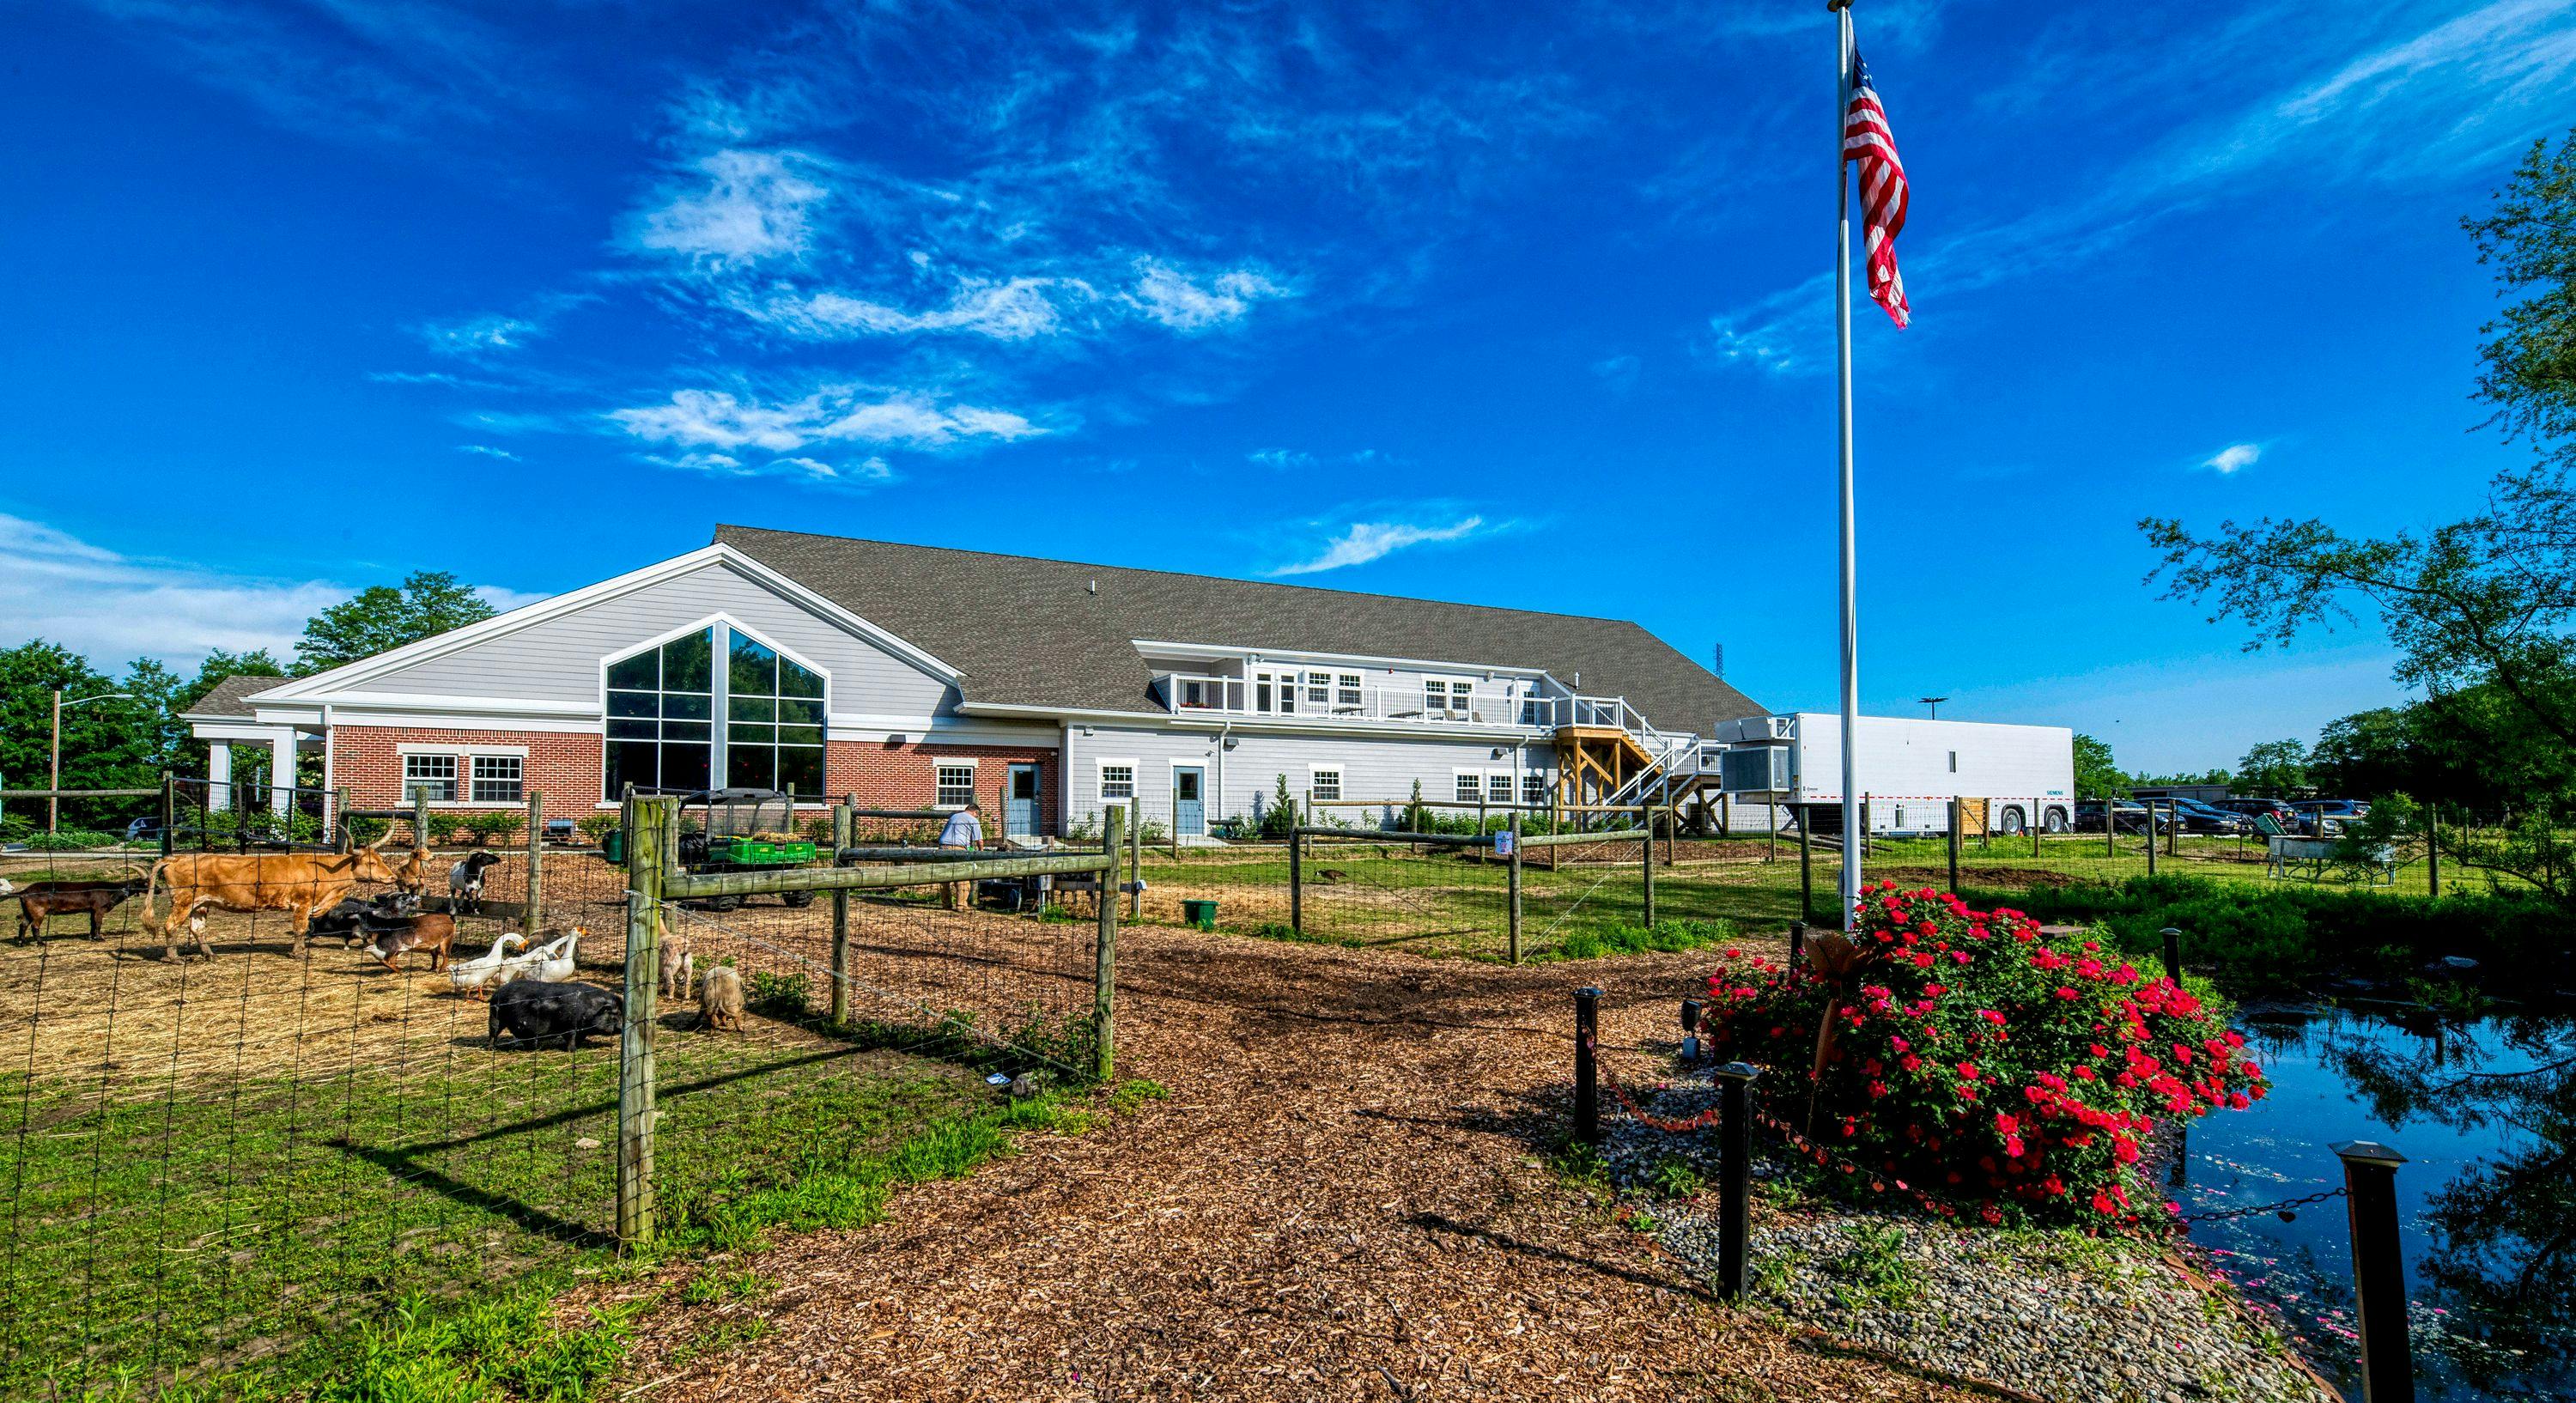 The hospital sits on a 16-acre farm that is open for public visits. Here, staff members care for the animals and the land, gather eggs to sell, and enjoy the beauty of nature from the hospital’s many windows and the deck that overlooks the space. (All images courtesy of Mount Laurel Animal Hospital) 